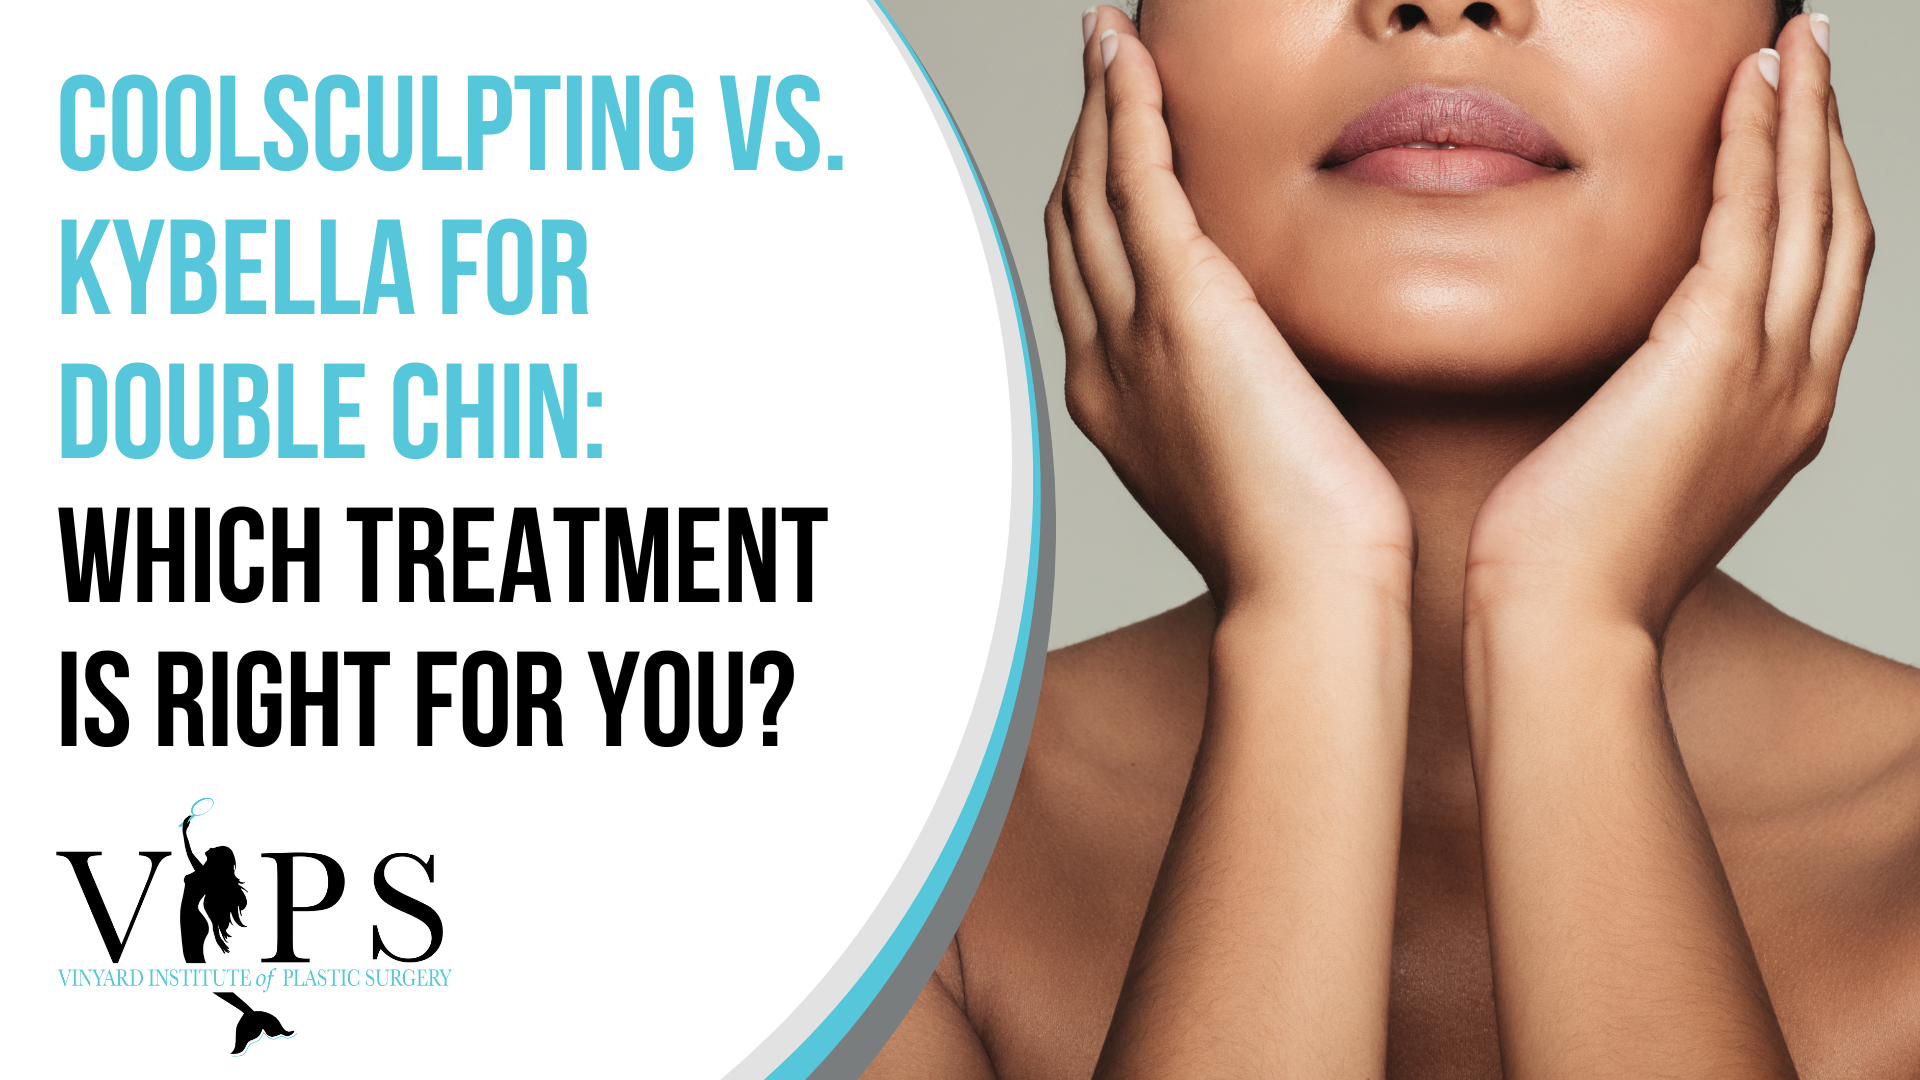 CoolSculpting vs. Kybella for Double Chin: Which Treatment is for You?